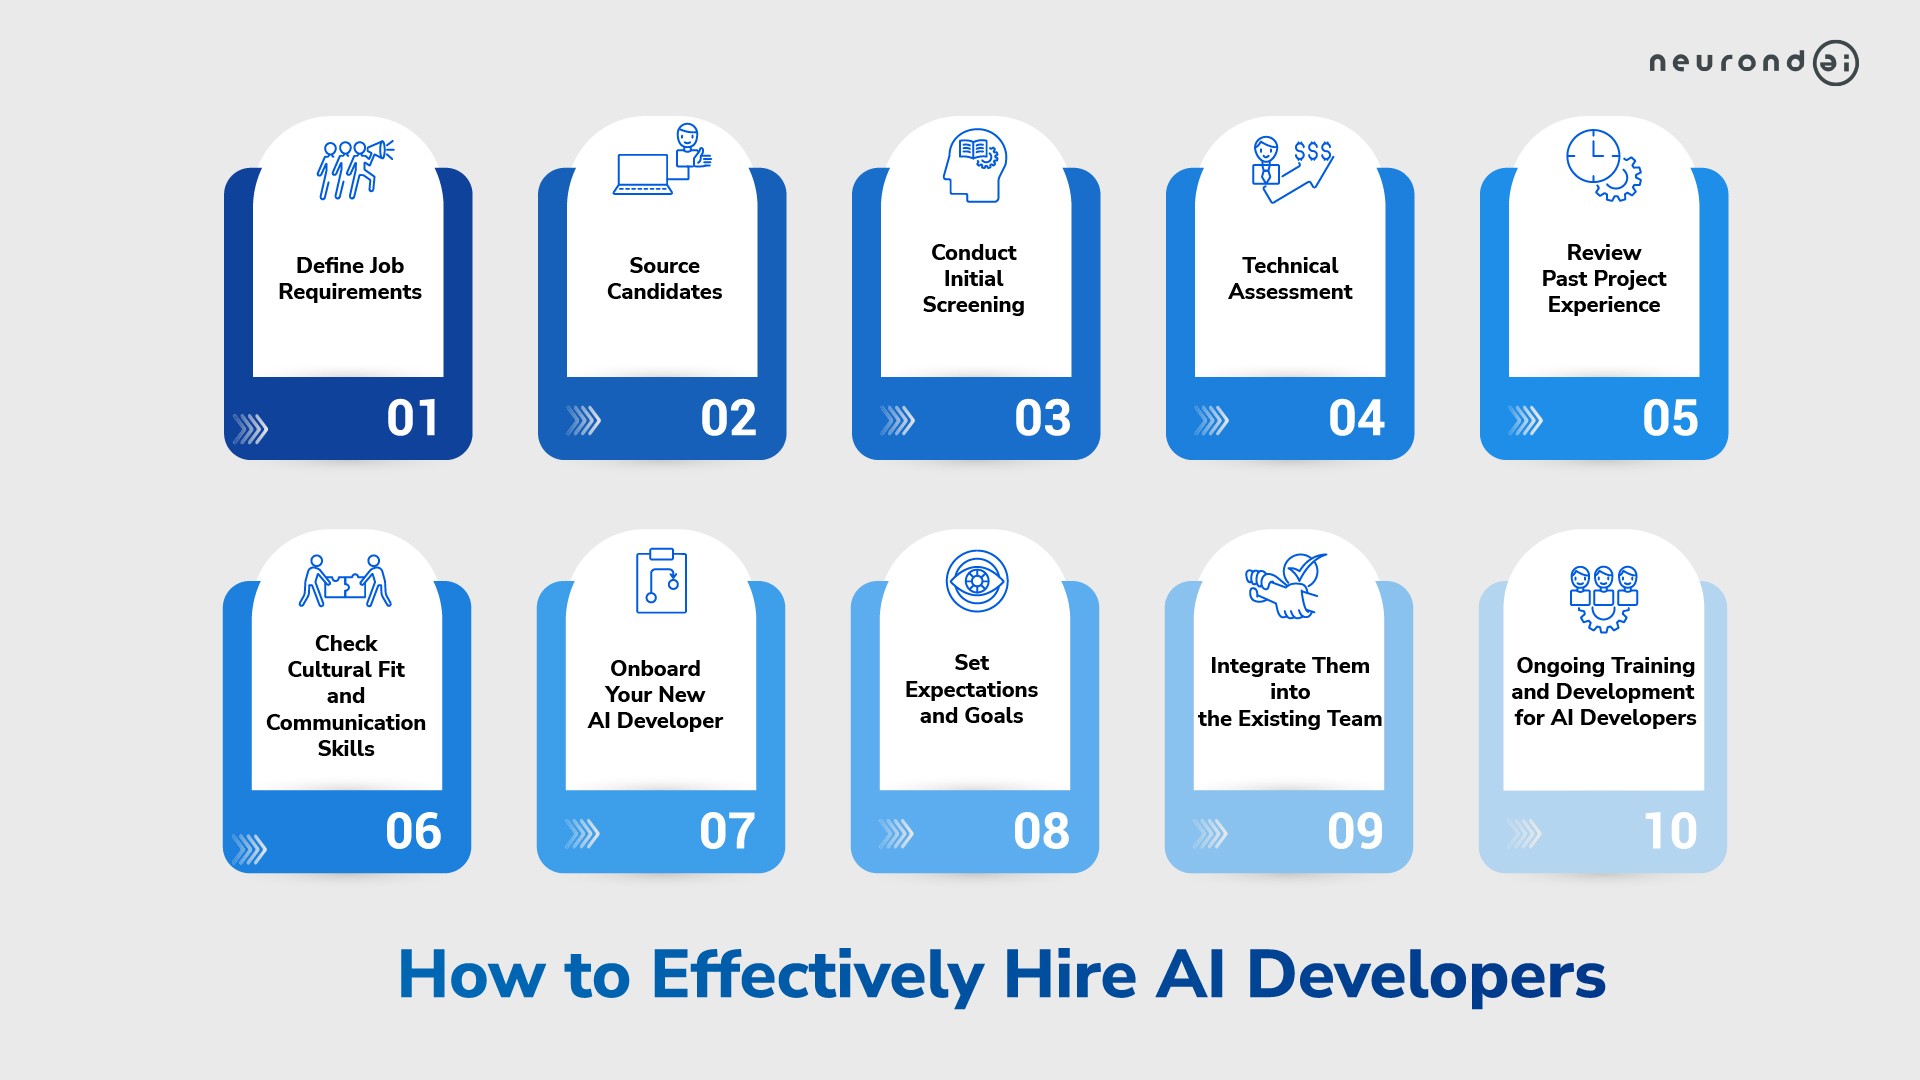 How to Effectively Hire AI Developers